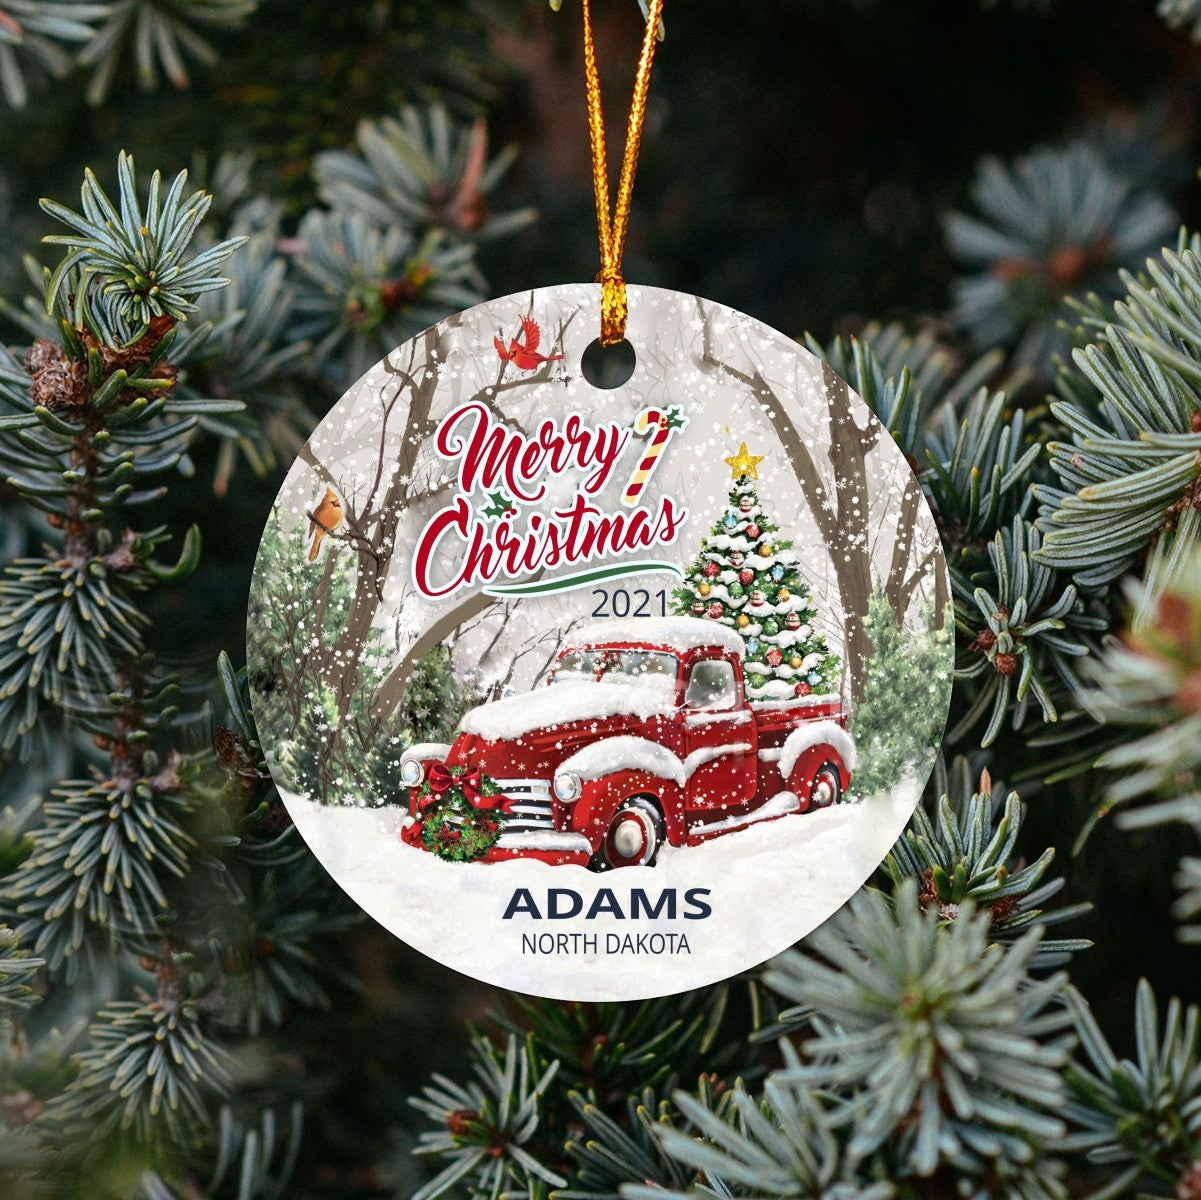 Christmas Tree Ornaments Adams - Ornament With Name City, State Adams North Dakota ND Ornament - Red Truck Xmas Ornaments 3'' Plastic Gift For Family, Friend And Housewarming